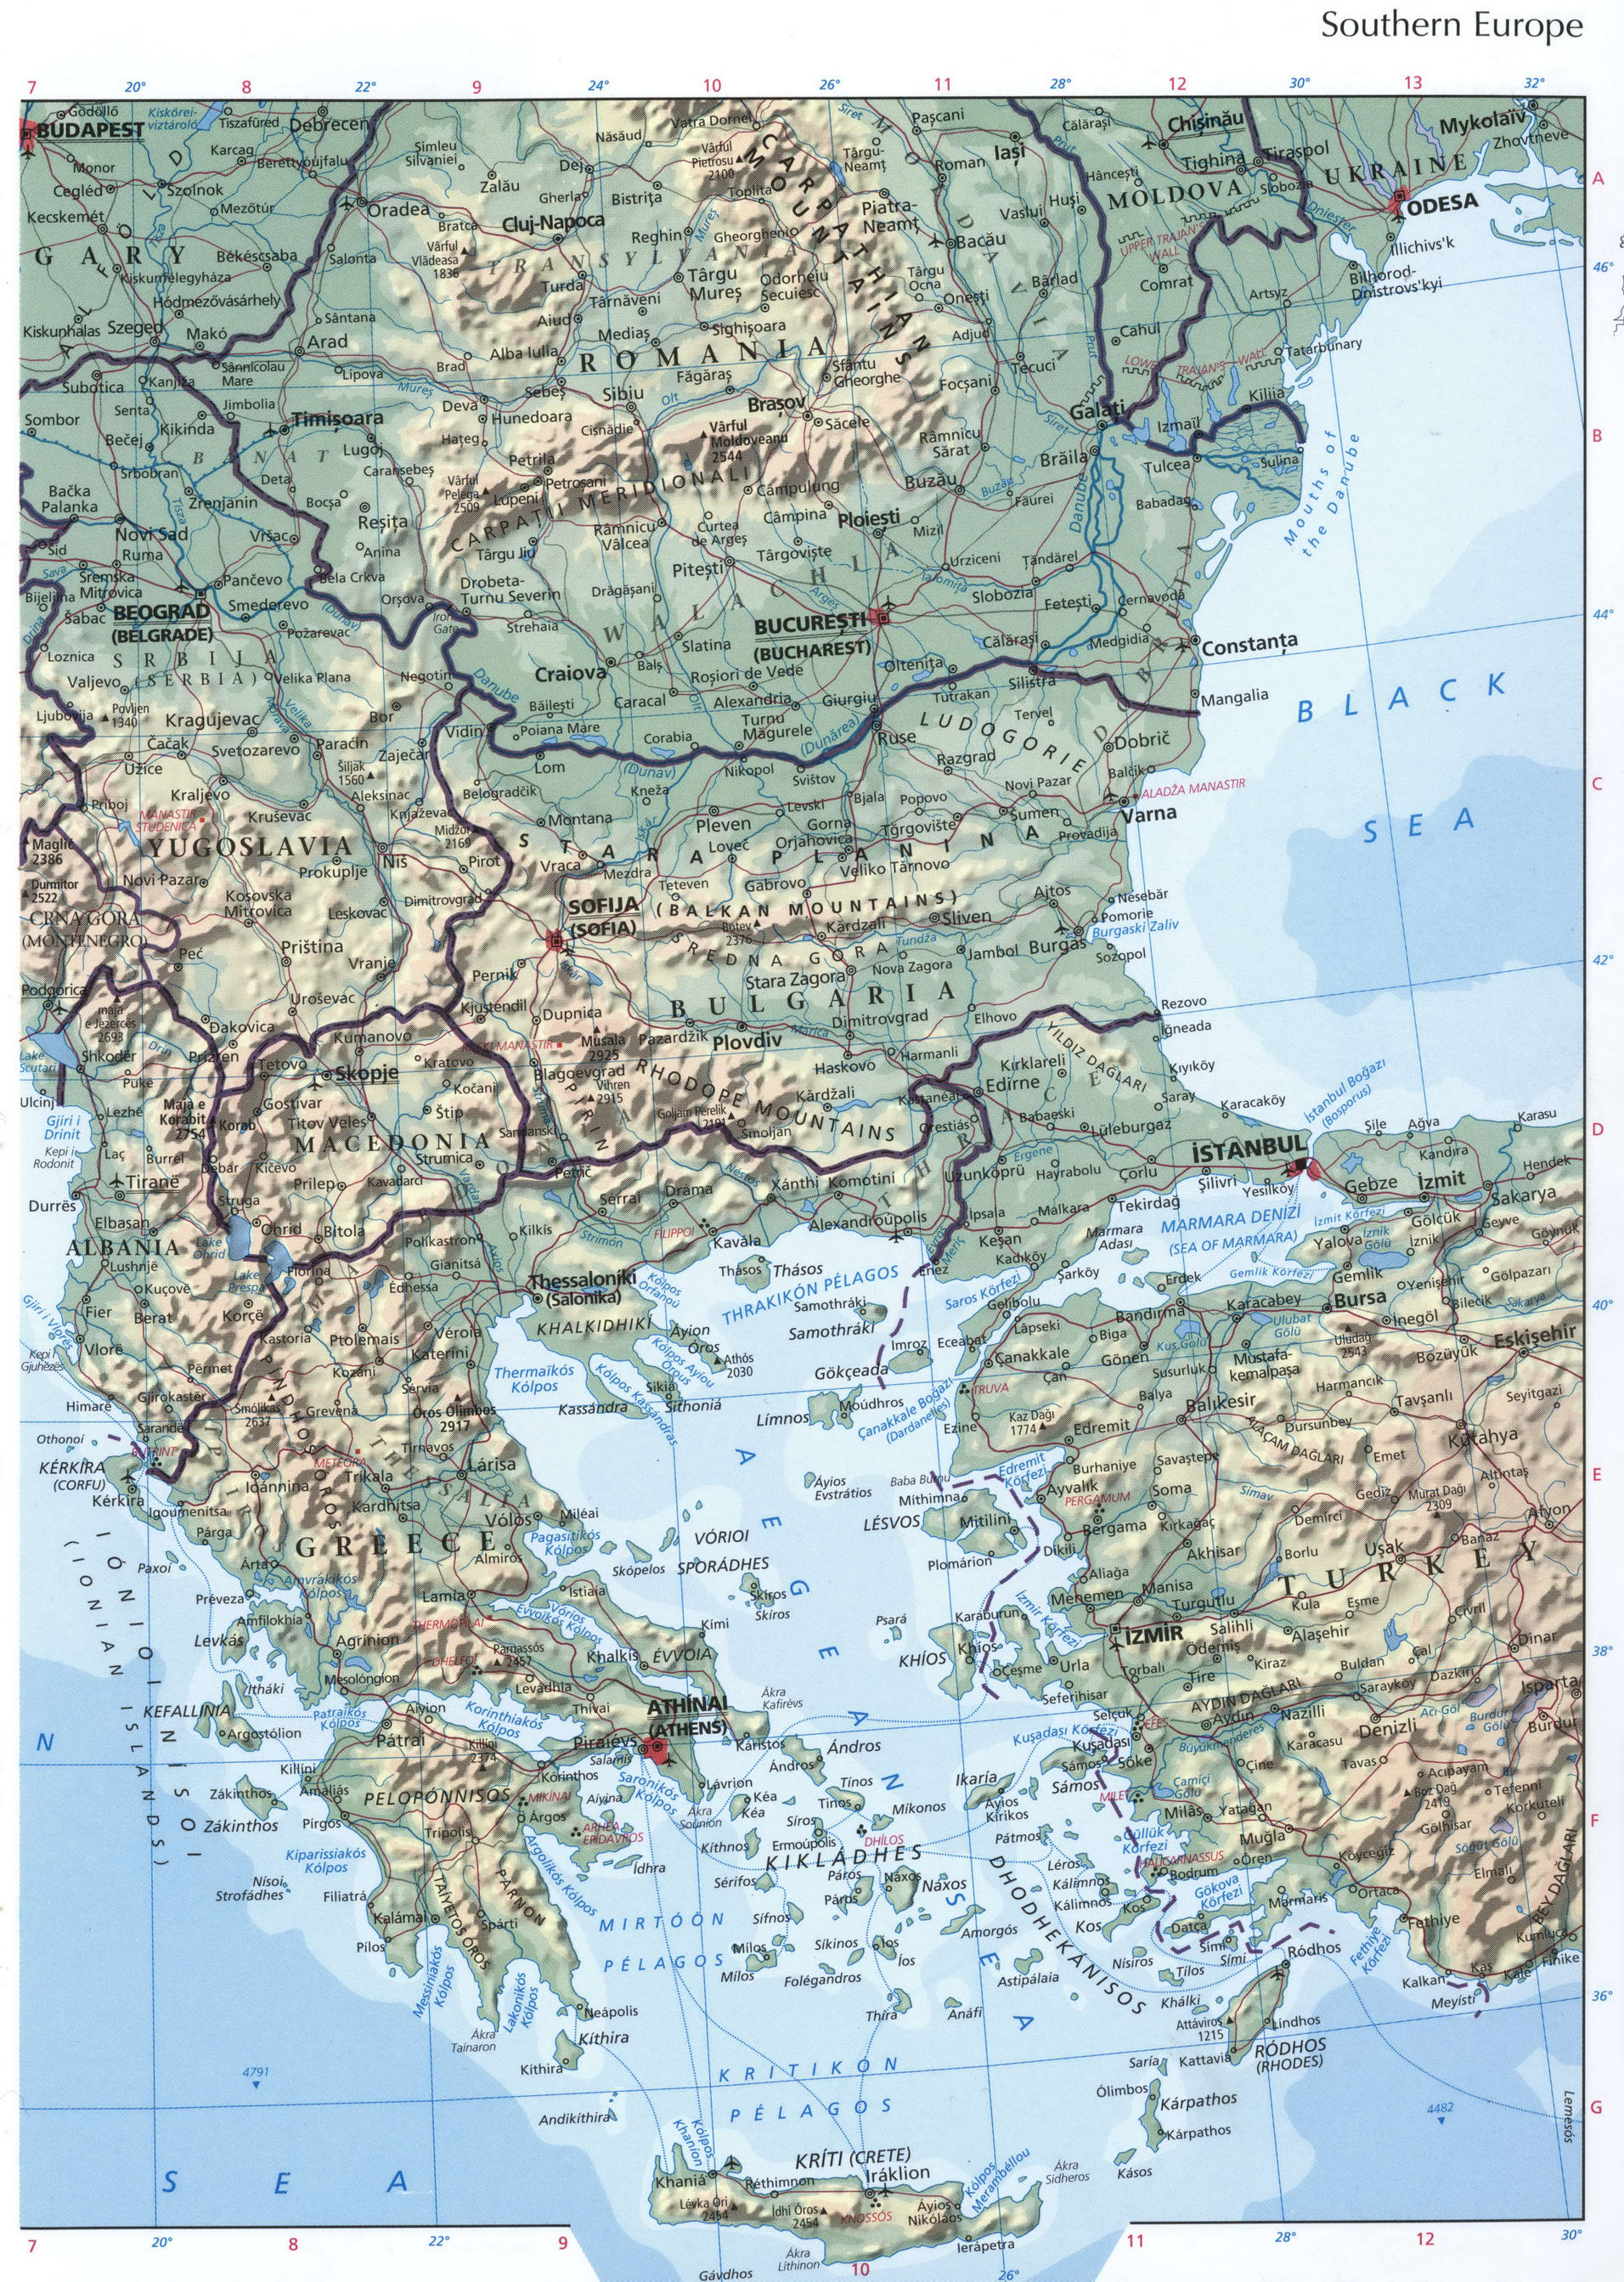 Southern Europe detailed map